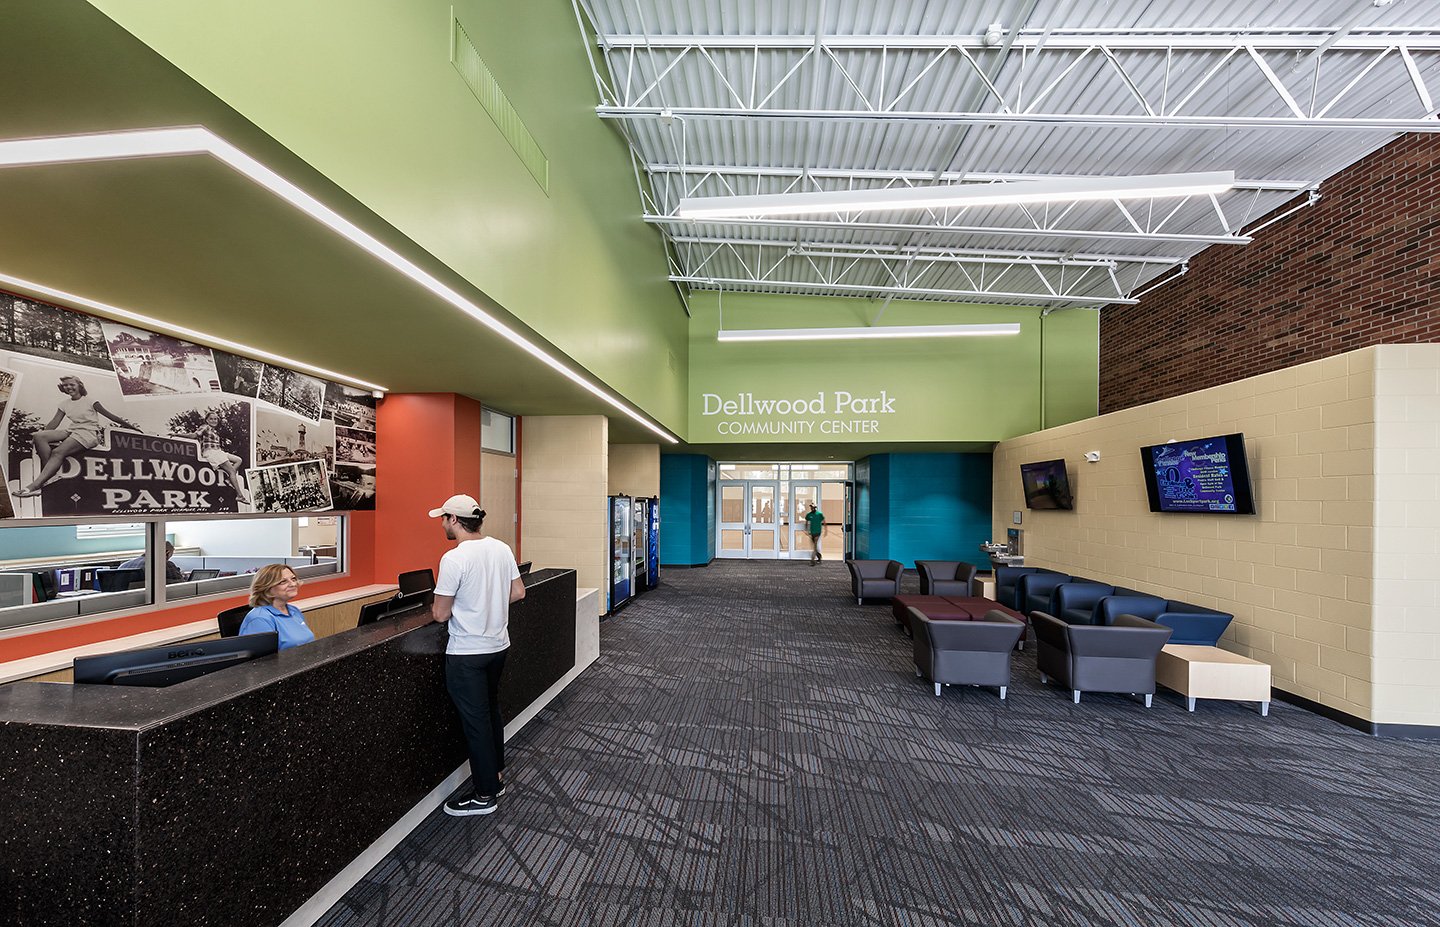 With a focus on being customer-friendly, the community center features welcoming colors throughout the reception and entry lobby.